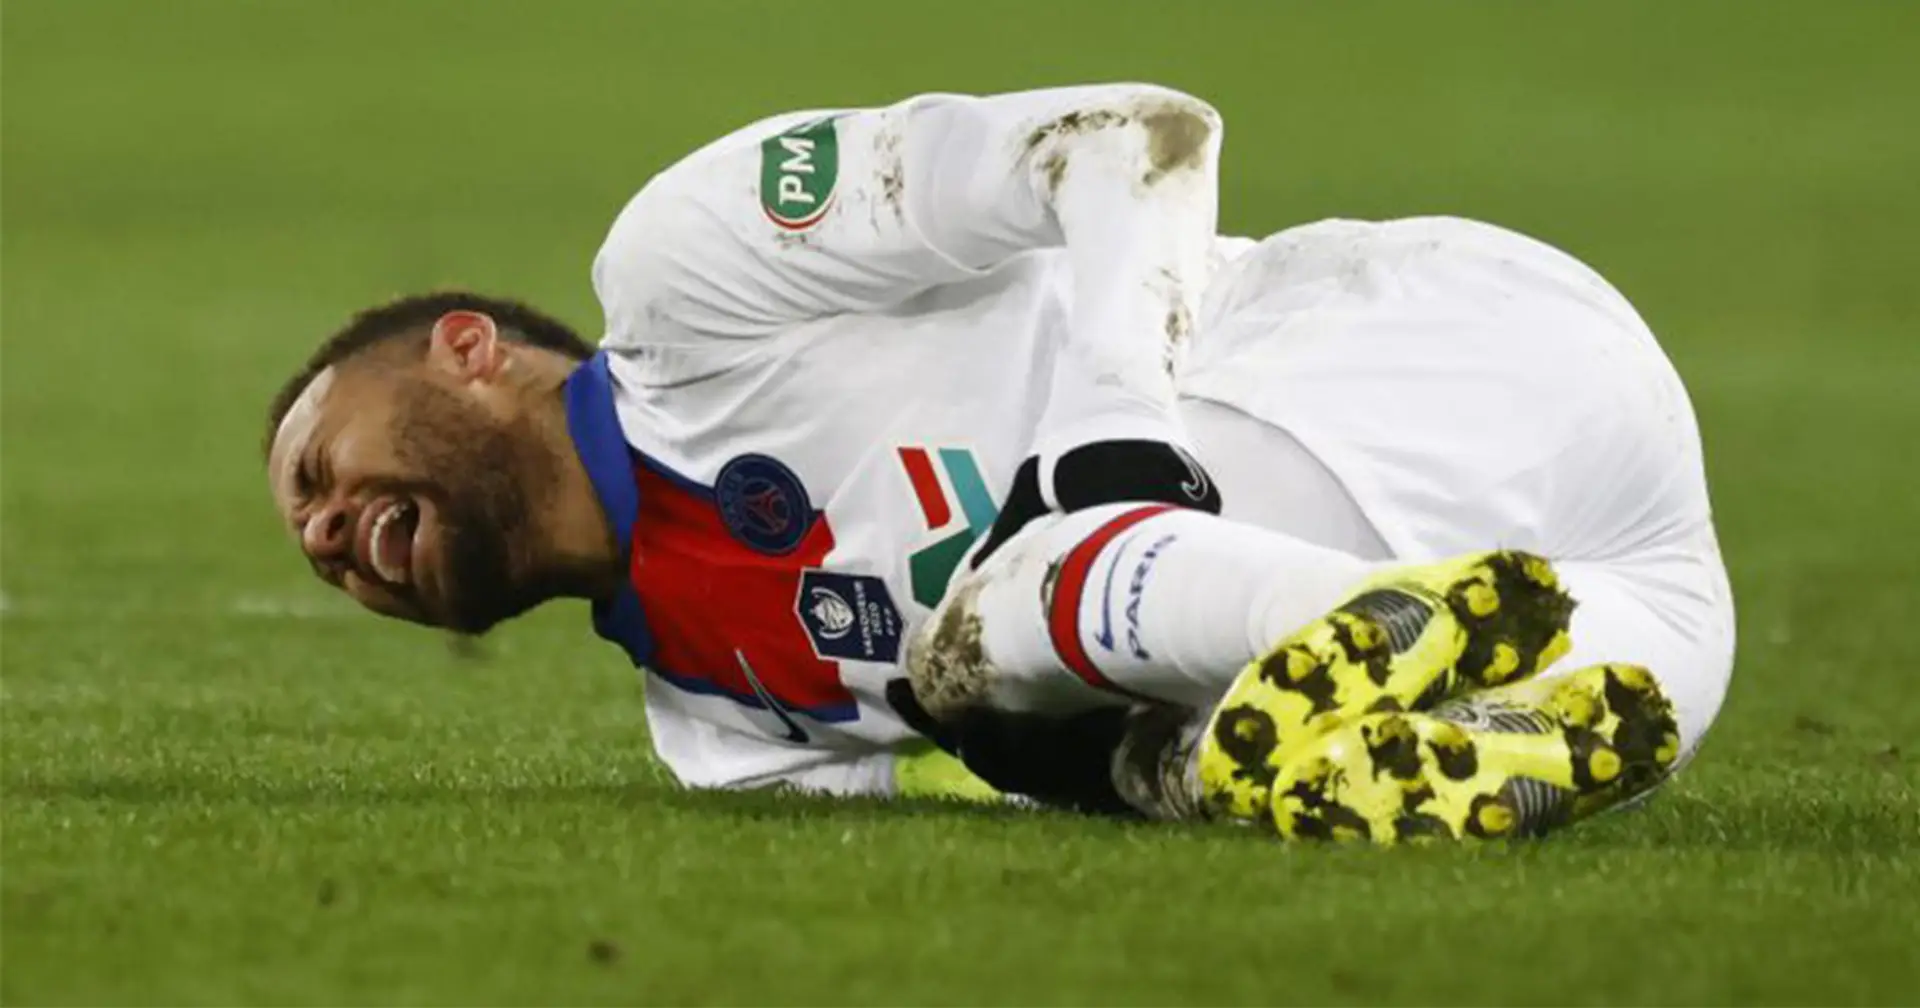 Just in: Neymar ruled out of Barca game, doubtful for 2nd leg